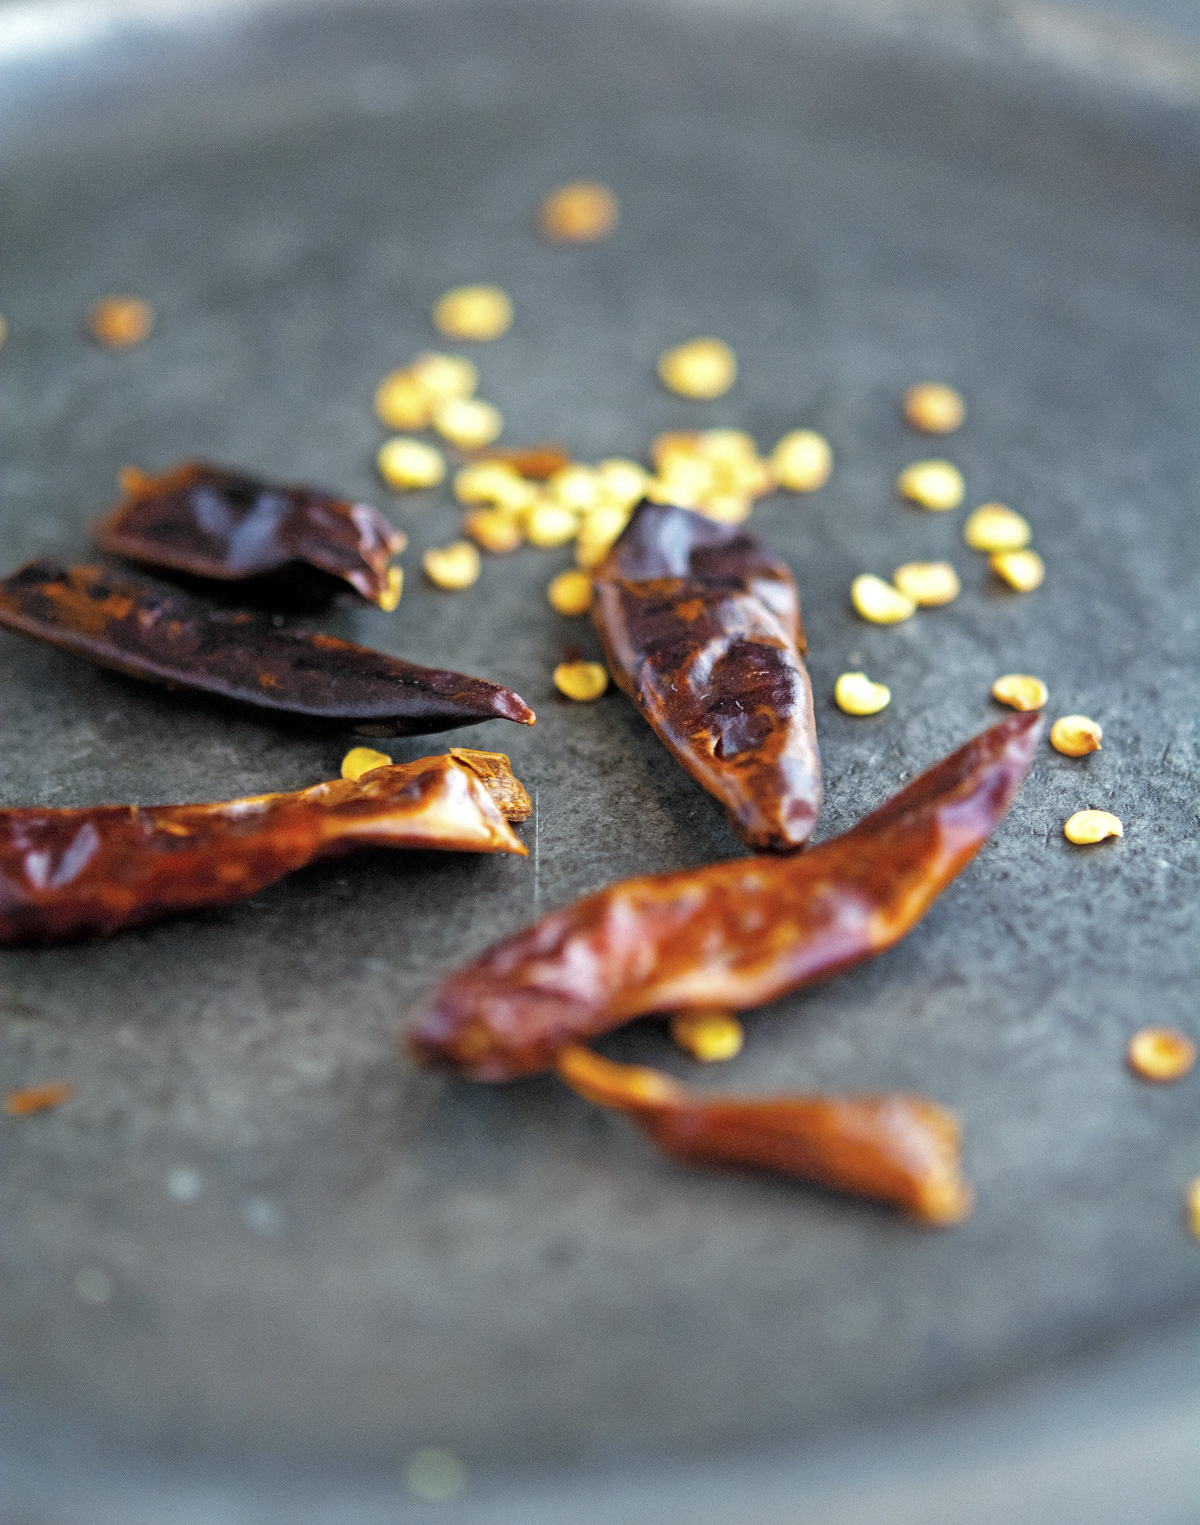 Dried Chiles